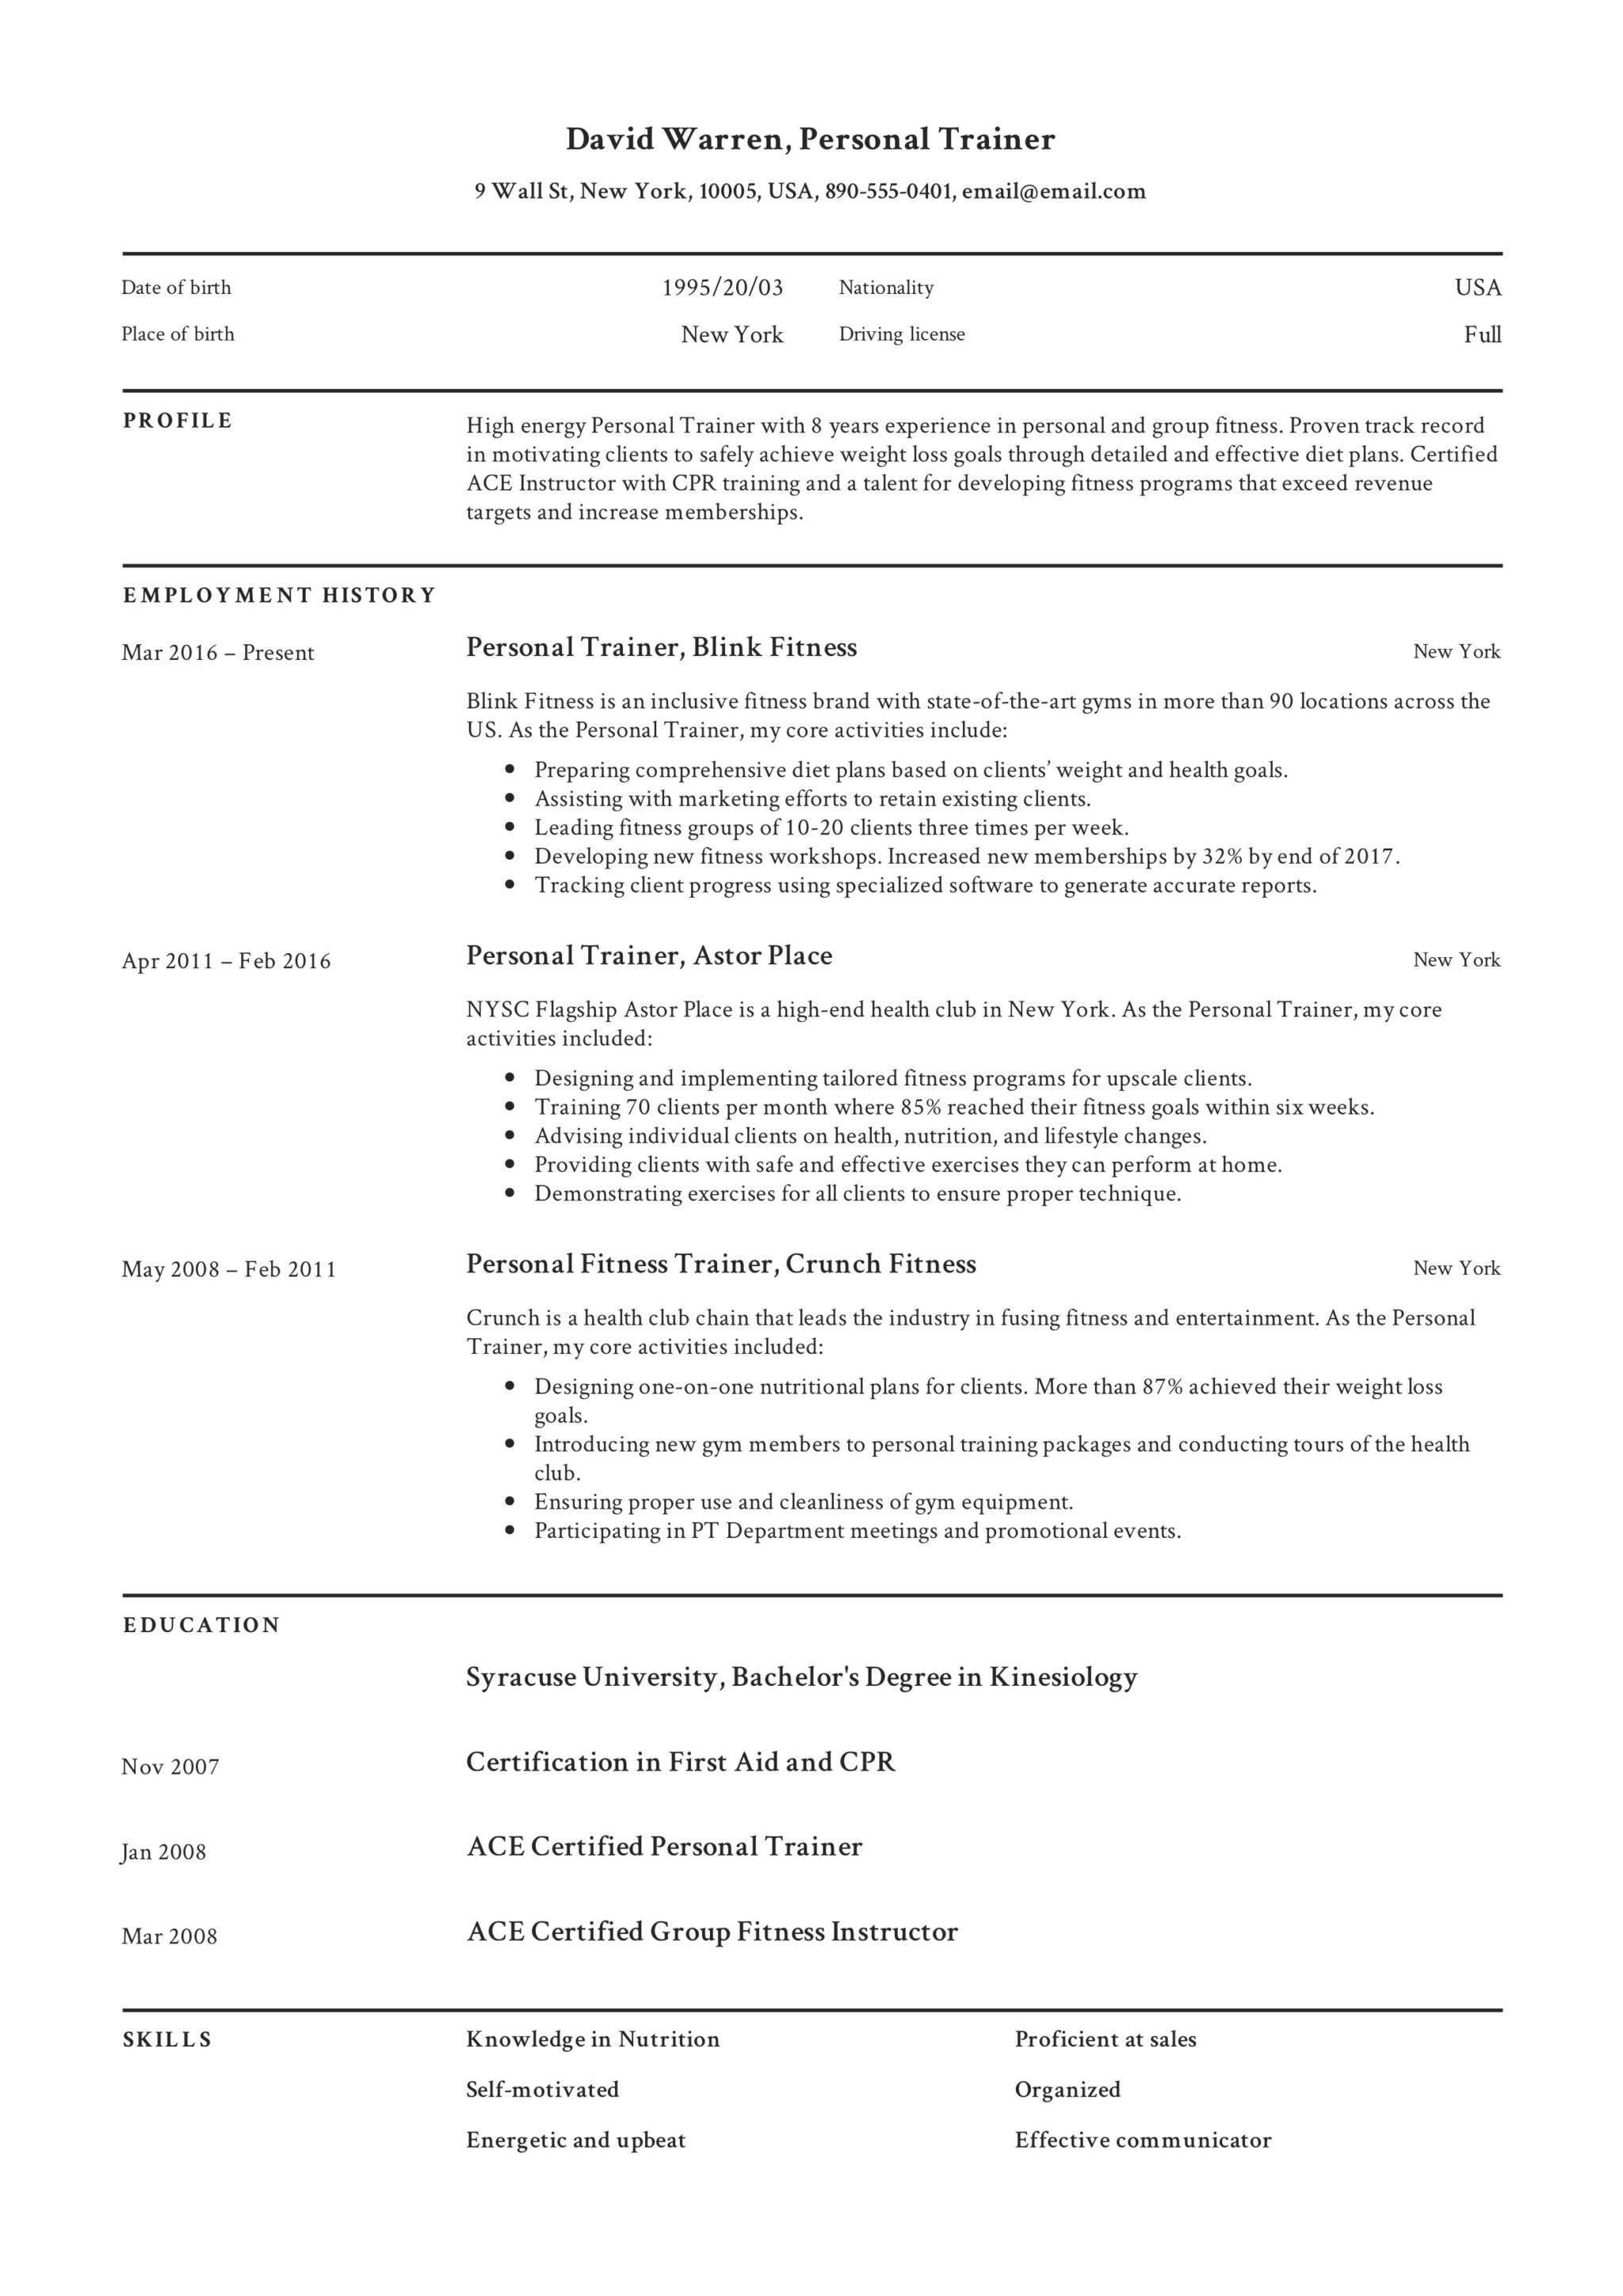 Professional Personal Trainer Resume